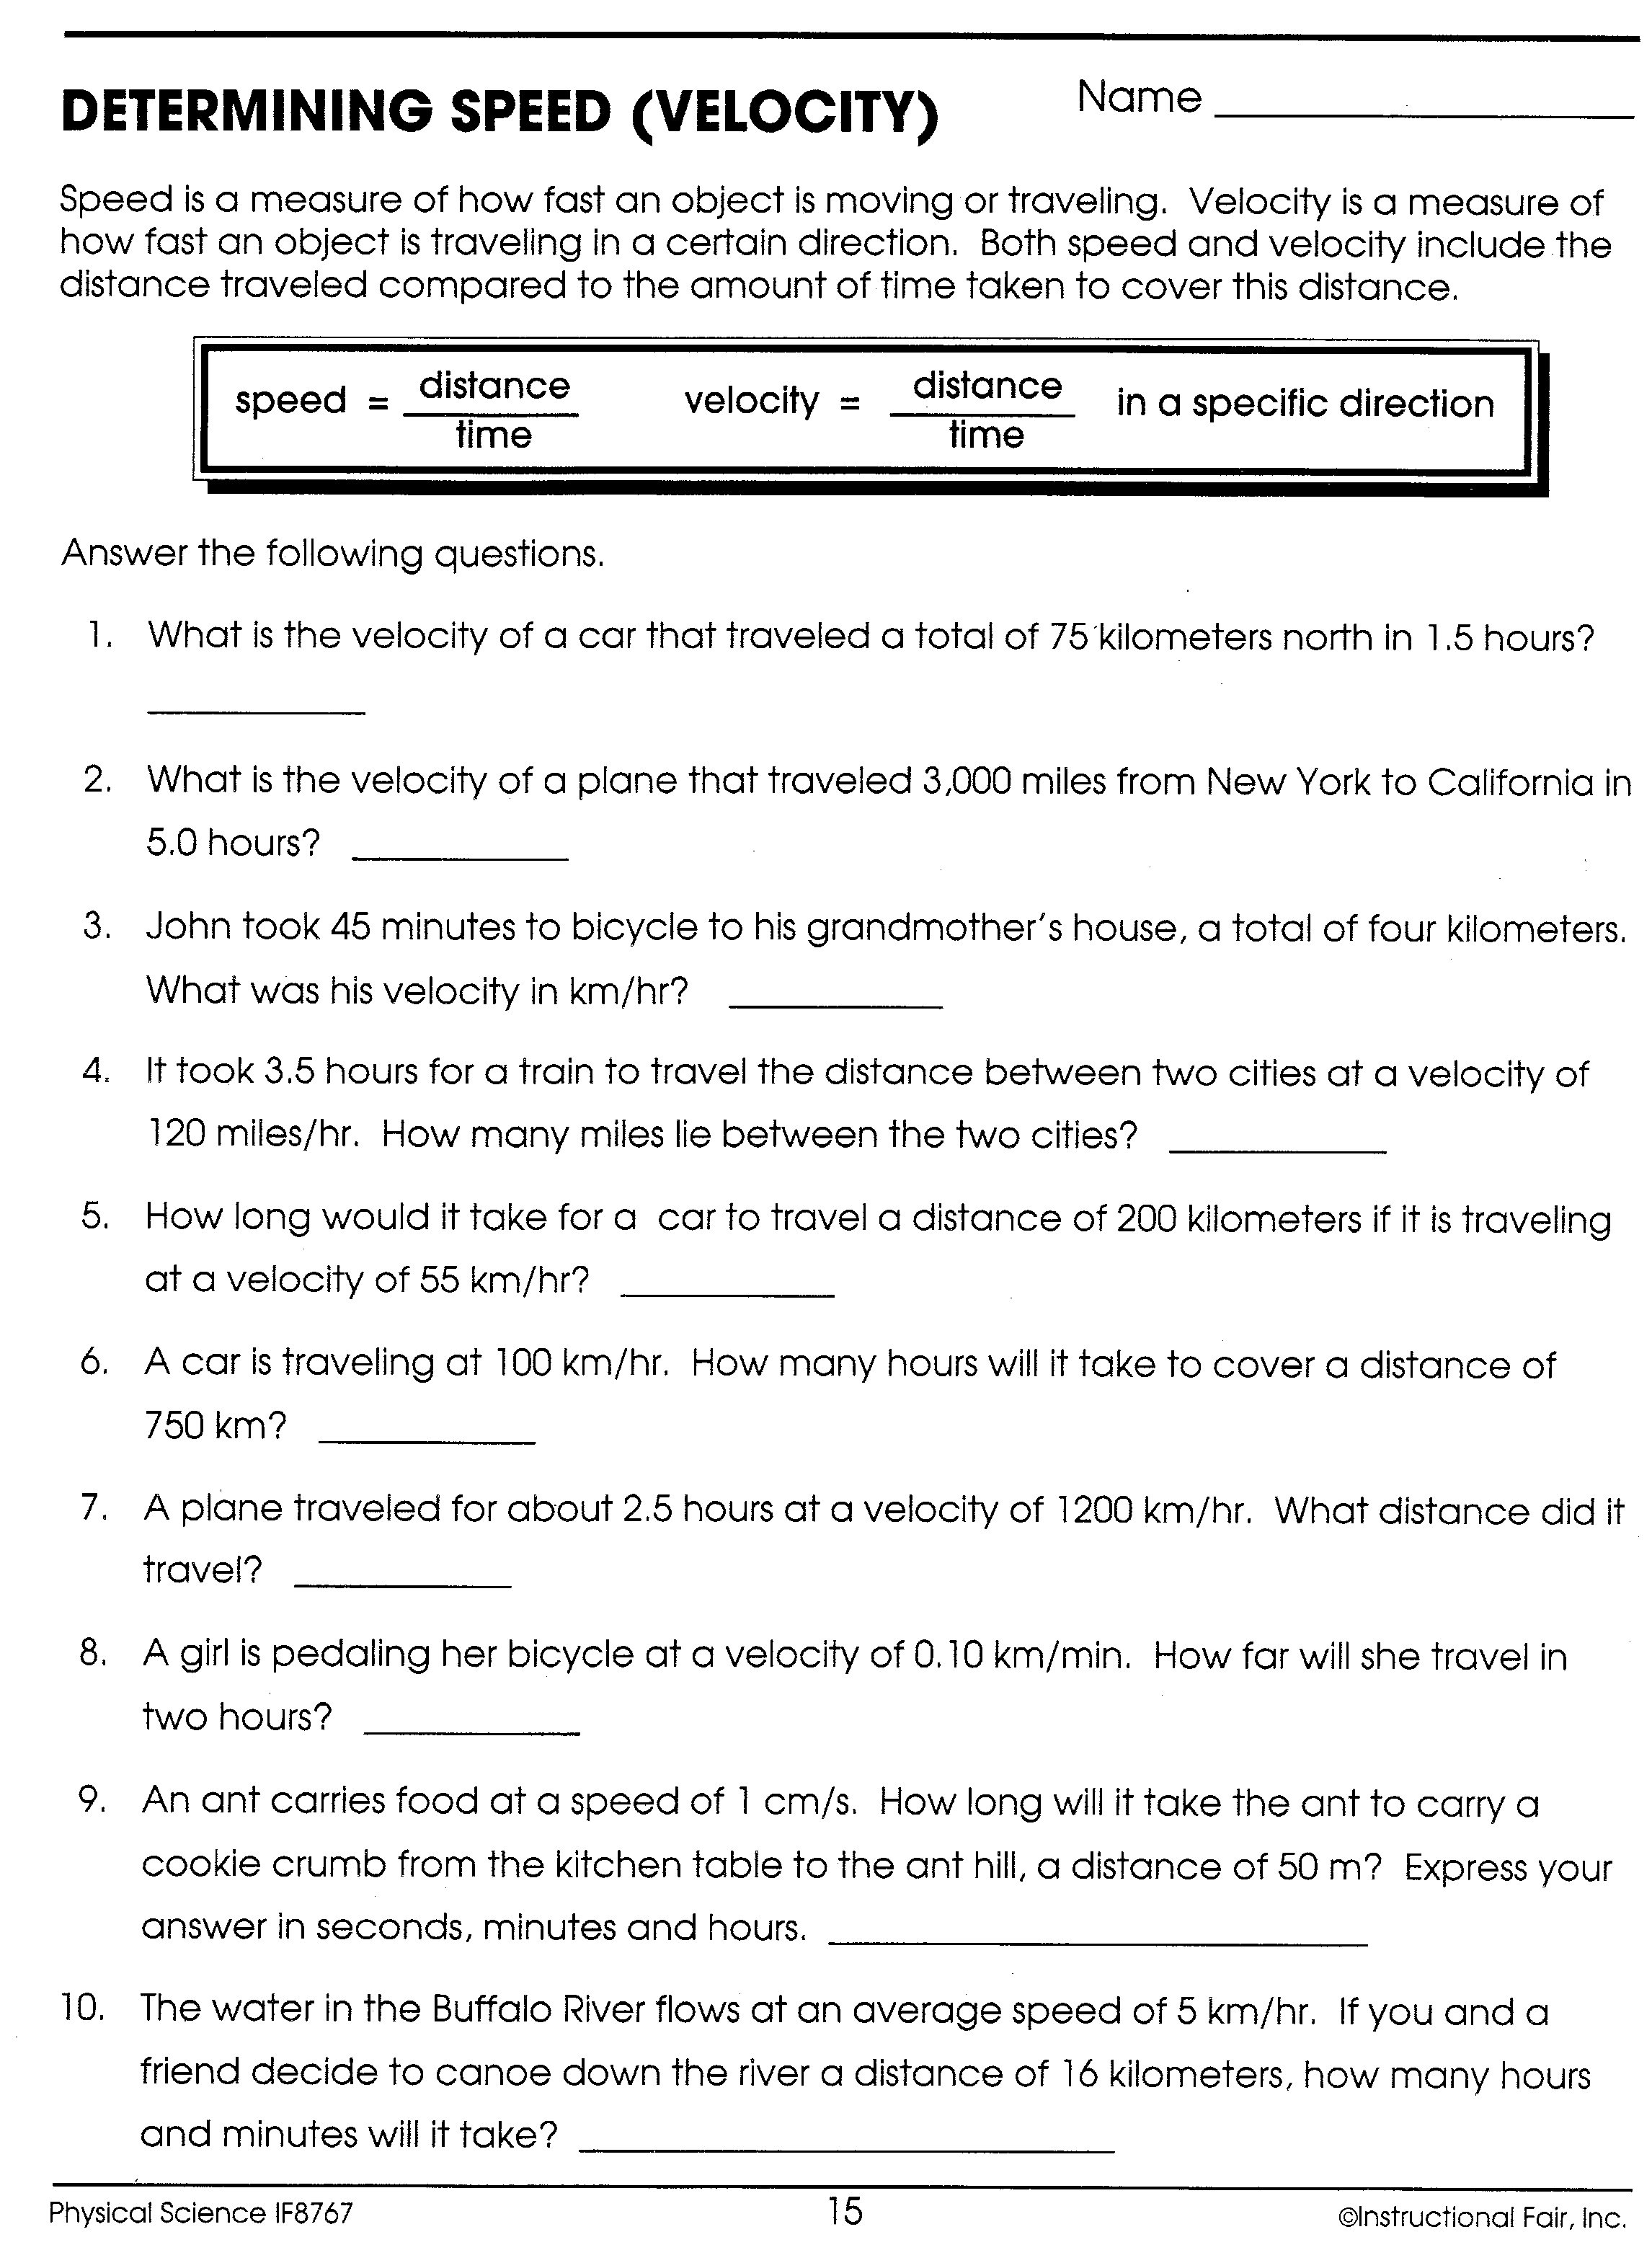 Speed - Lessons - Blendspace For Speed And Velocity Worksheet